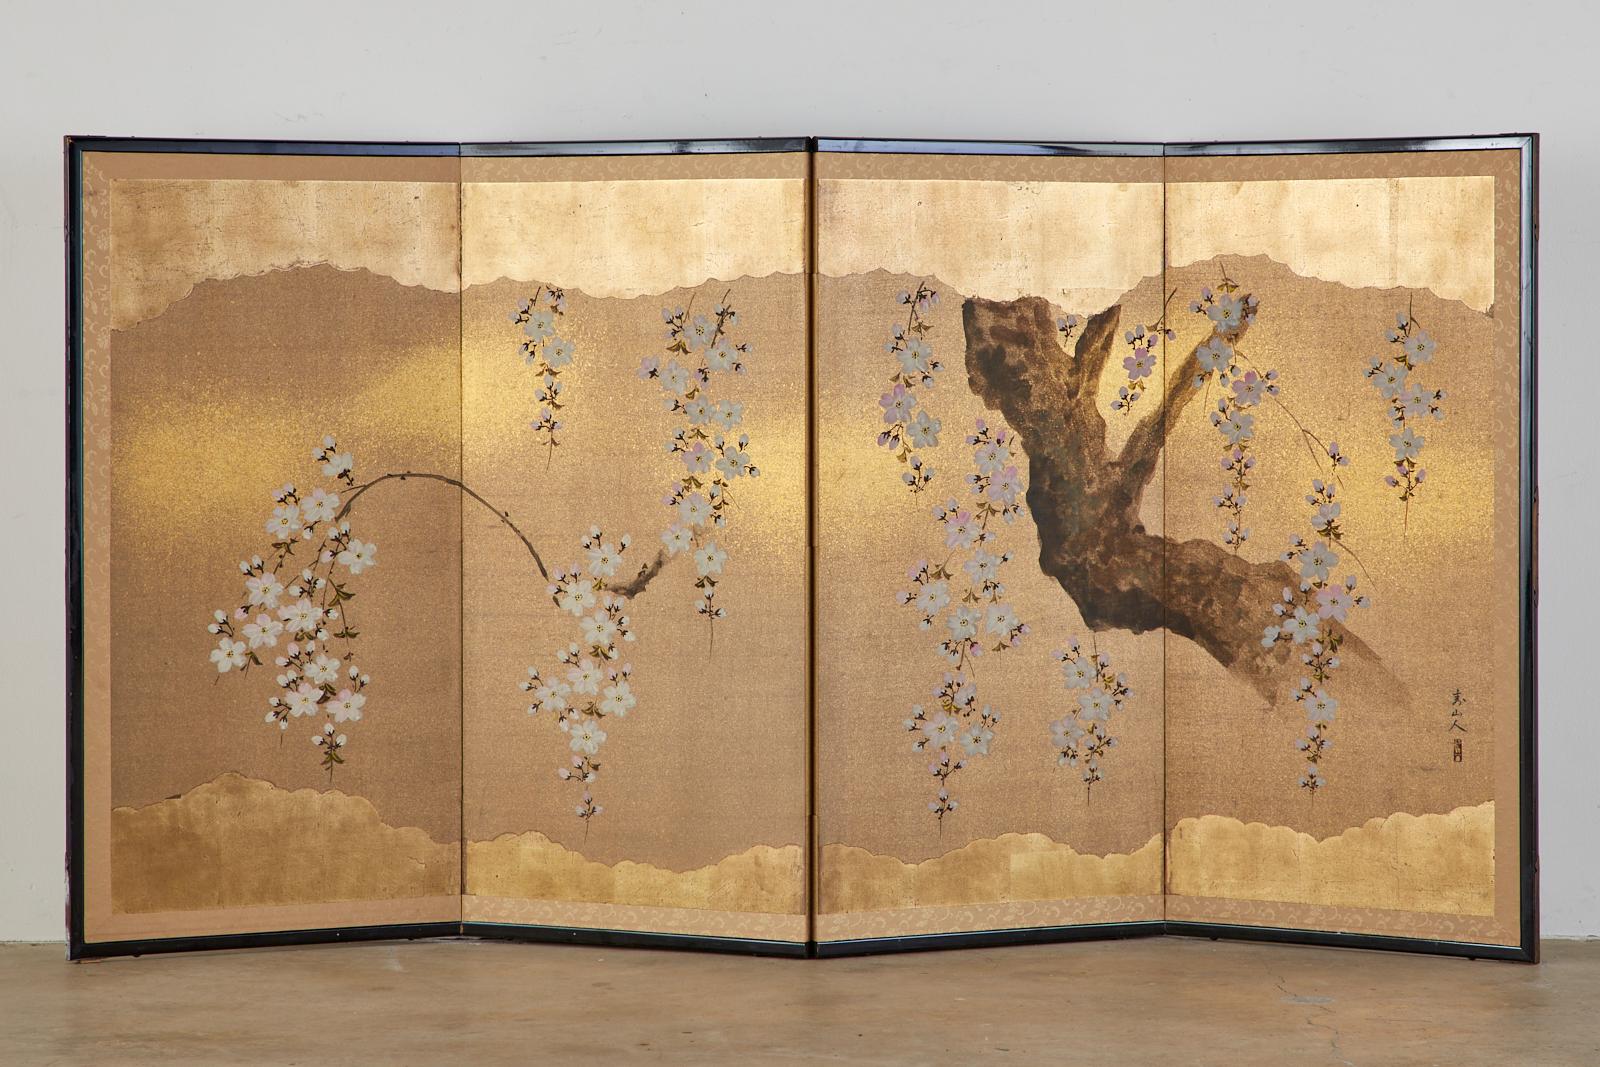 Gorgeous Japanese four panel Showa period screen depicting flowering cherry tree blossoms. Made in the Nihonga School style with ink and color pigments on paper with dramatic gold leaf and gold flecks. Signed by artist Hisayama-hito with a seal on